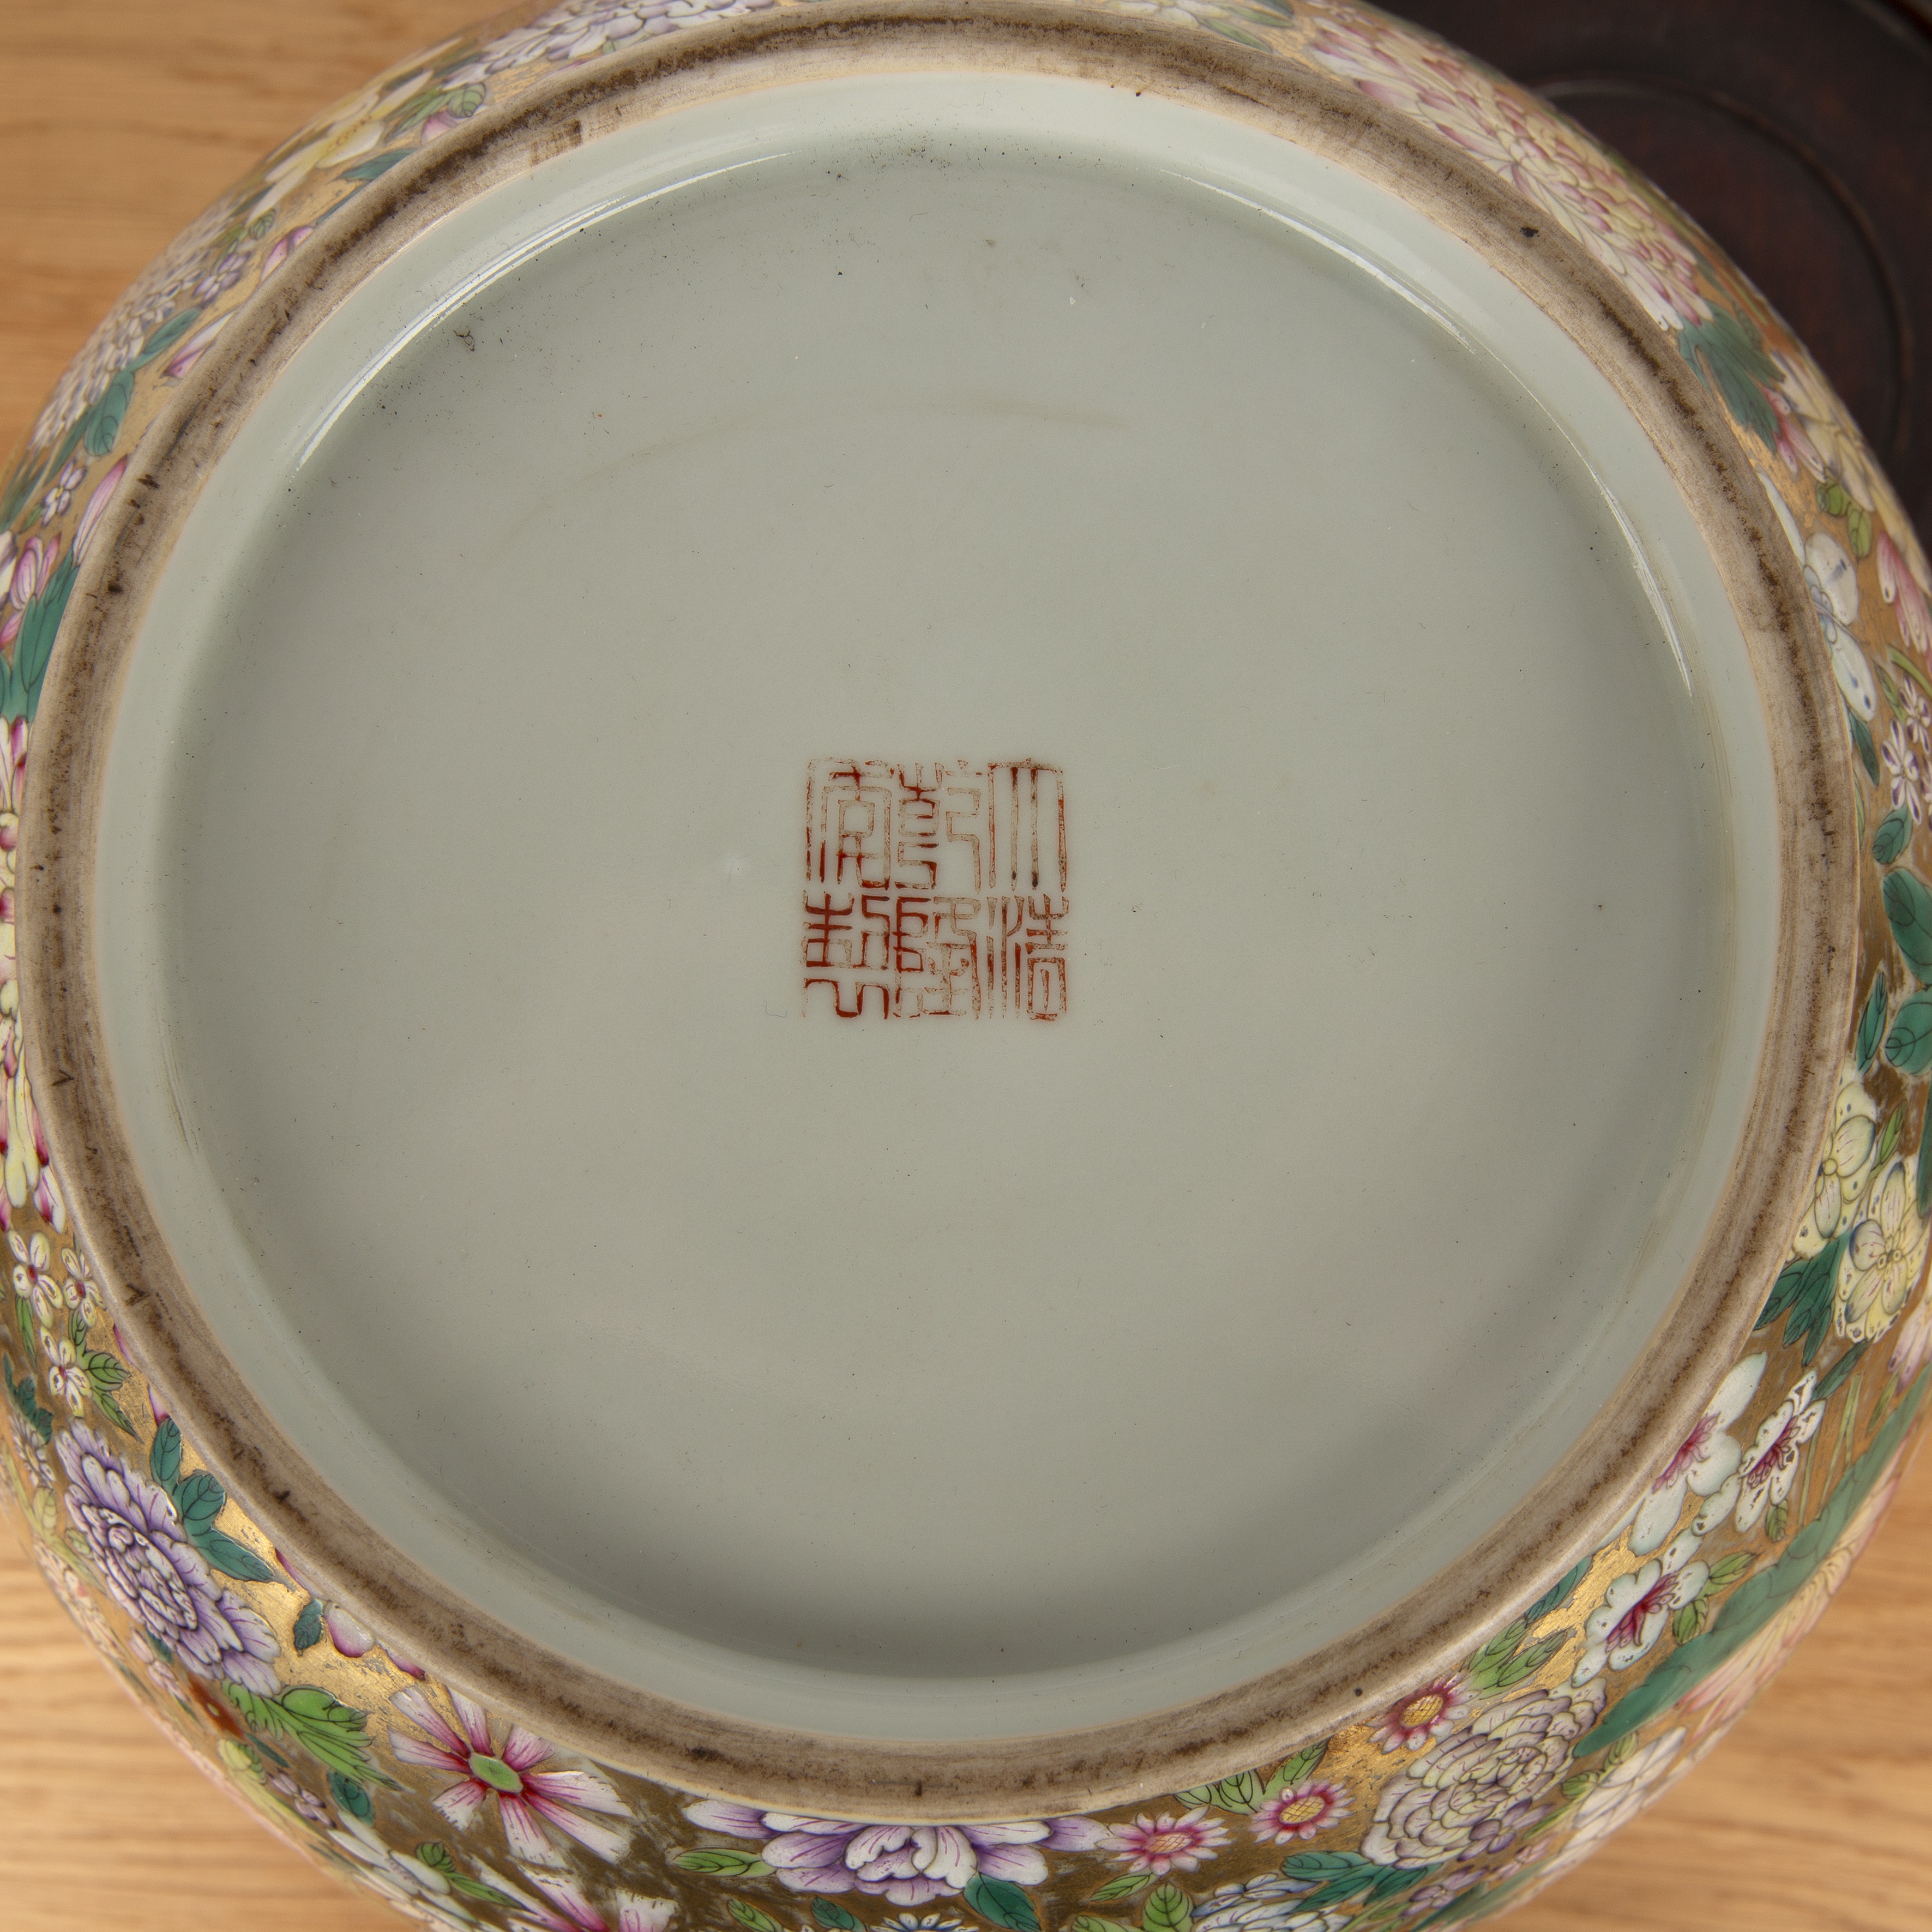 Millefleur porcelain vase and stand Chinese, circa 1900 with raised ruyi and ring handles. The - Image 5 of 10